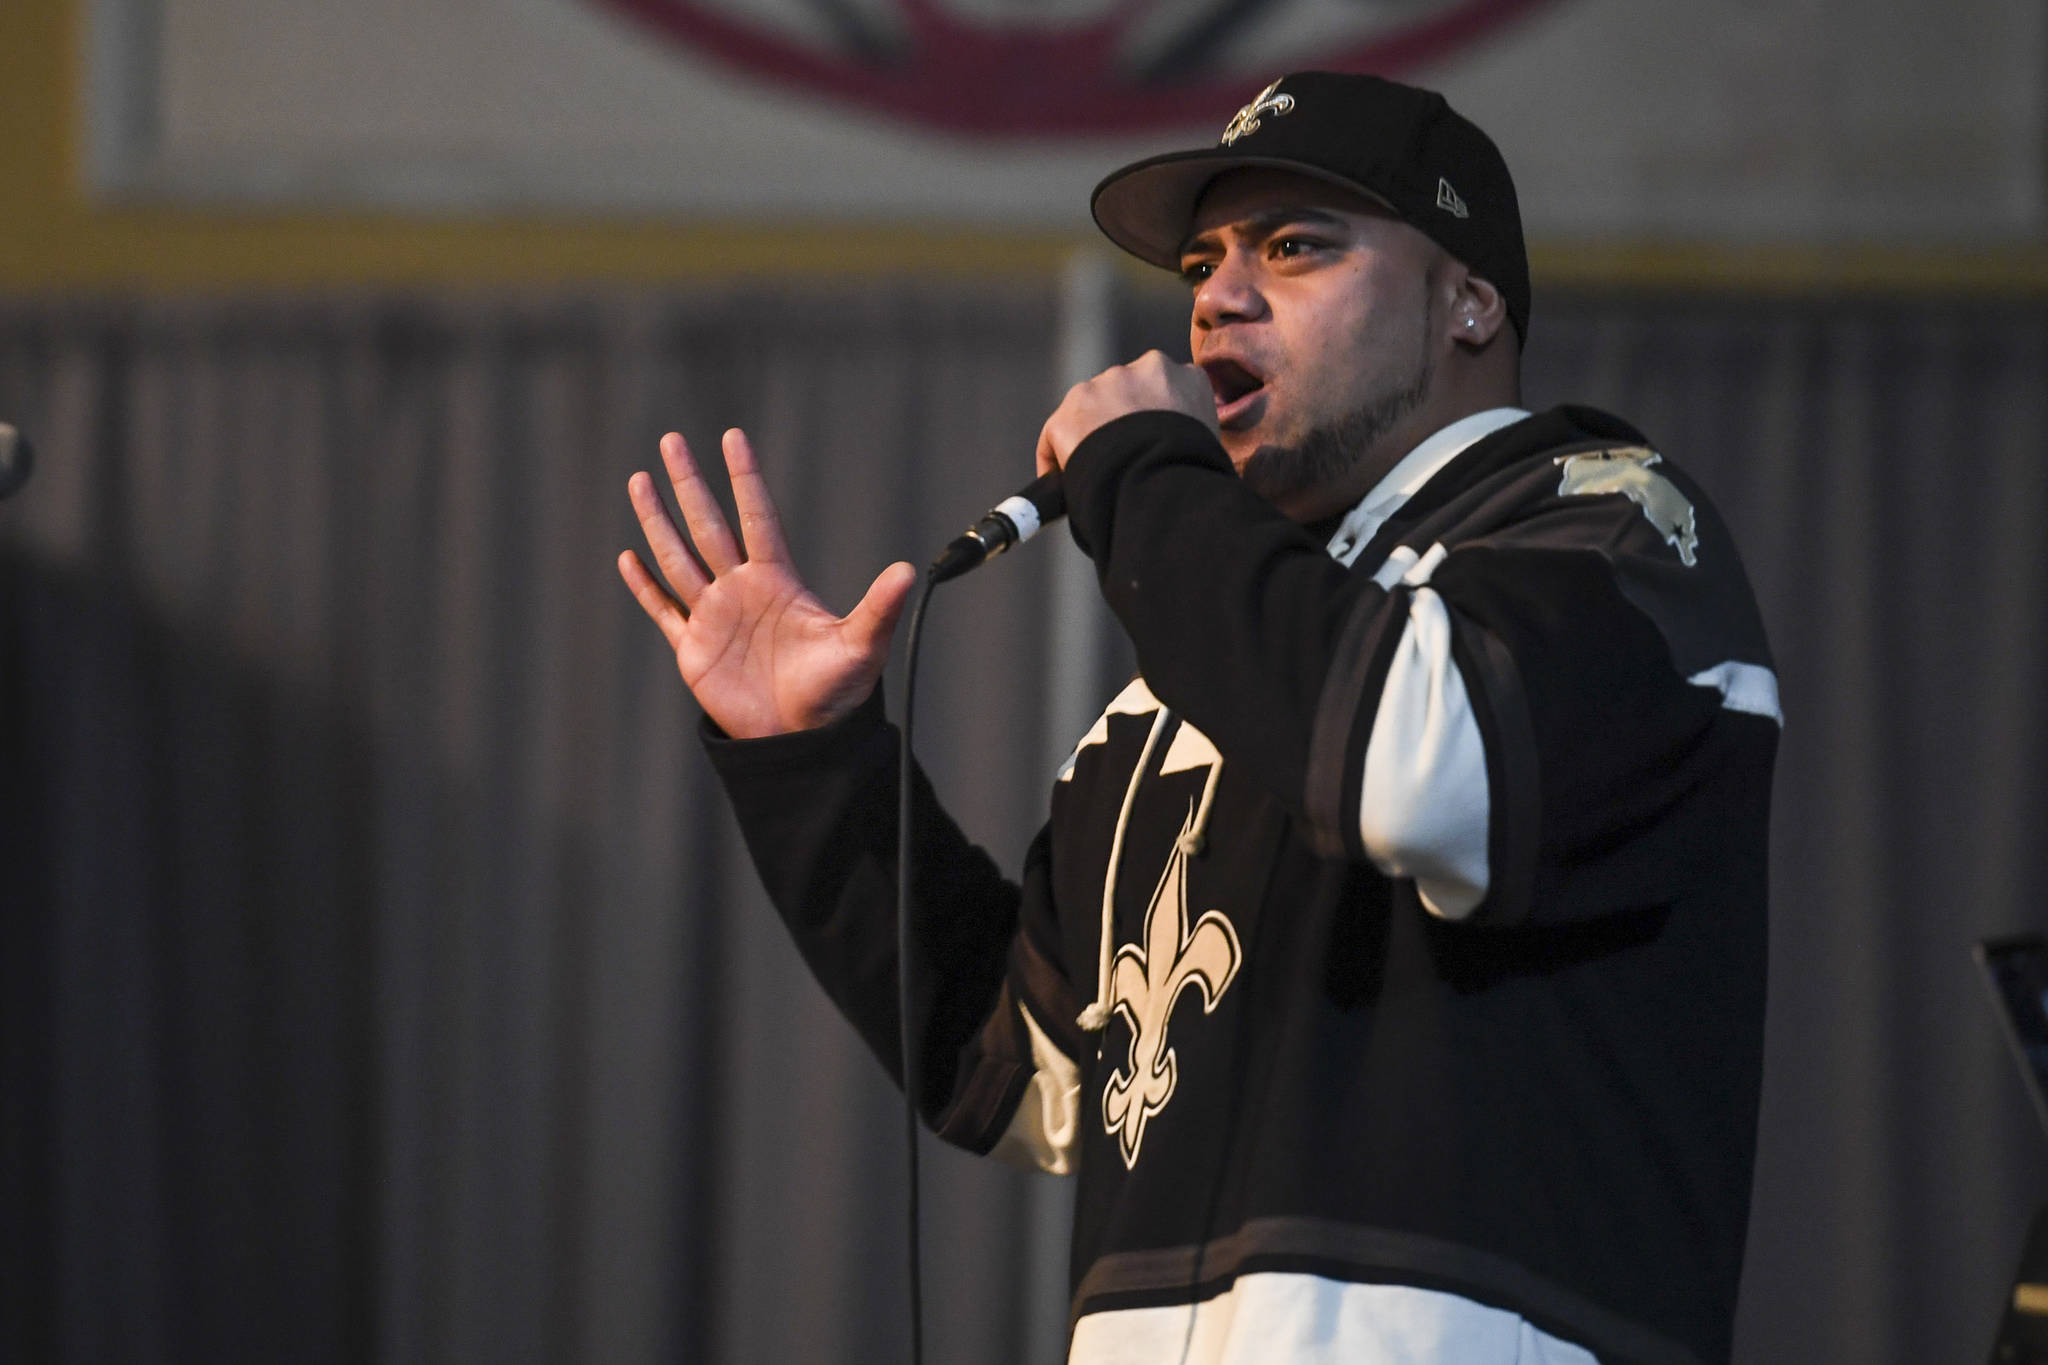 Cram Sam performs during the Killah Priest of Wu Tang Southeast Tour at the Juneau Arts & Culture Center on Friday, Dec. 20, 2019. (Michael Penn | Juneau Empire)